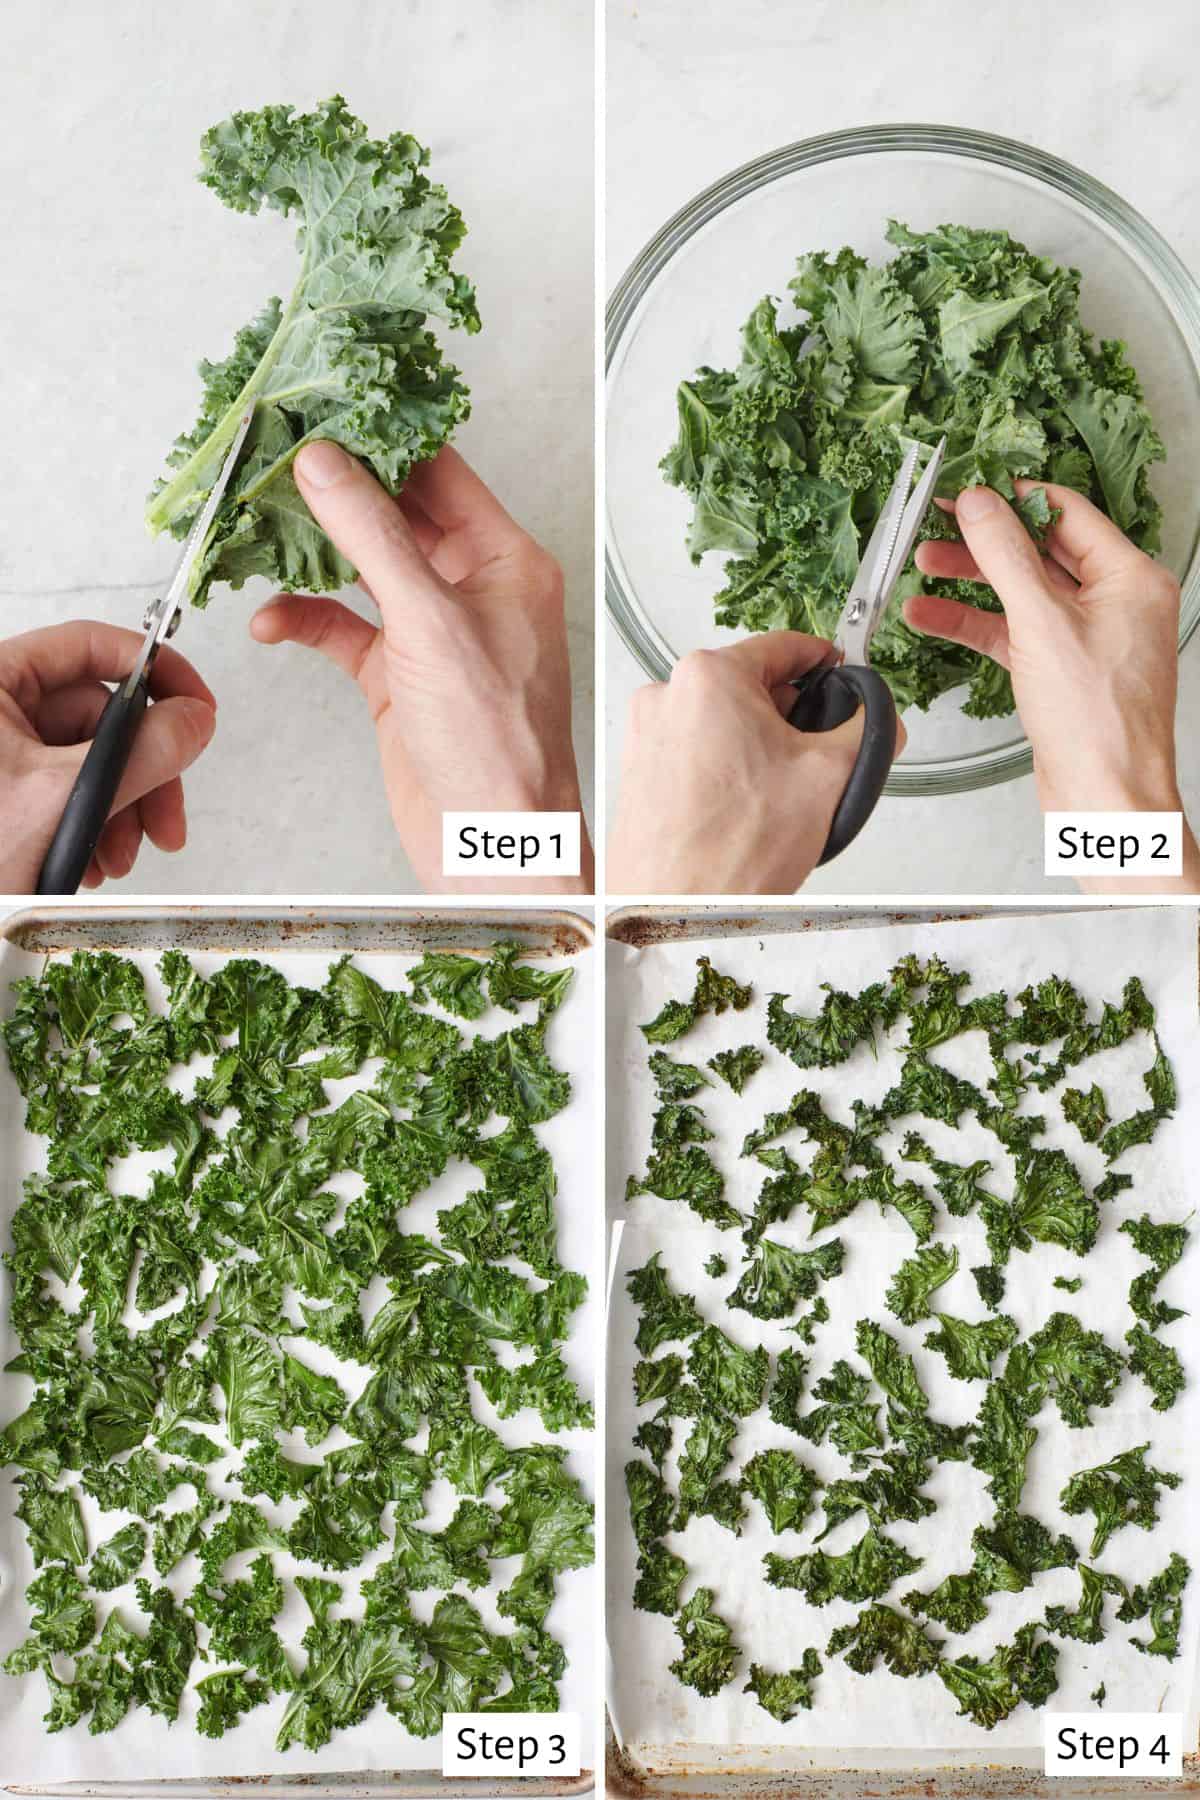 Collage showing the fresh kale getting cut and dried to make baked kale chips